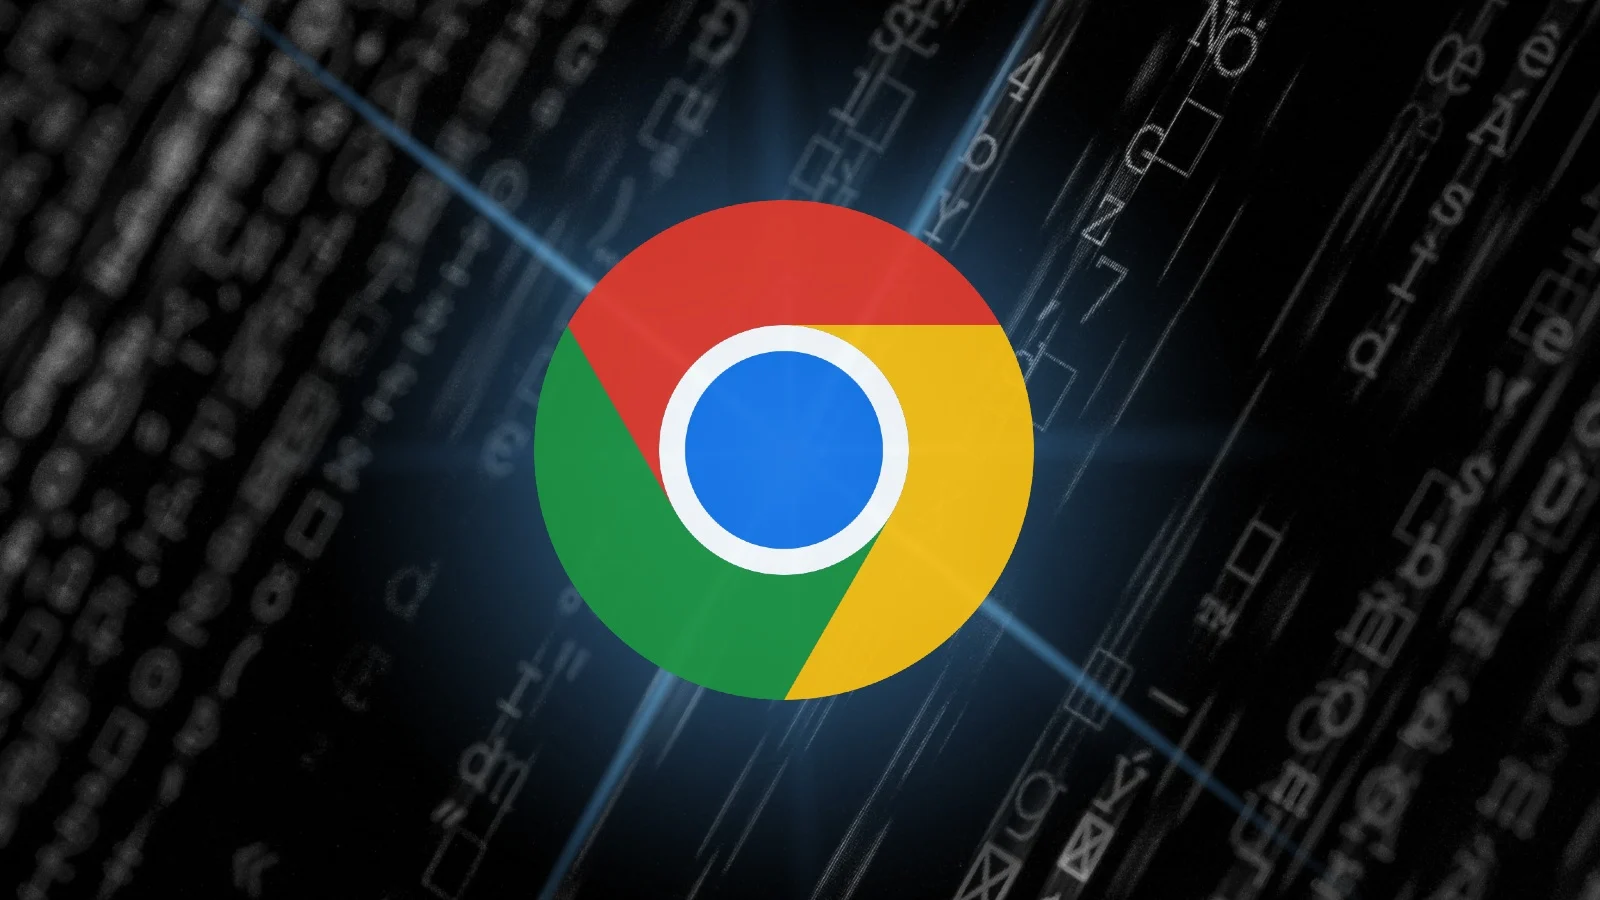 Google Chrome is testing a new feature to automatically hide user’s IP addresses